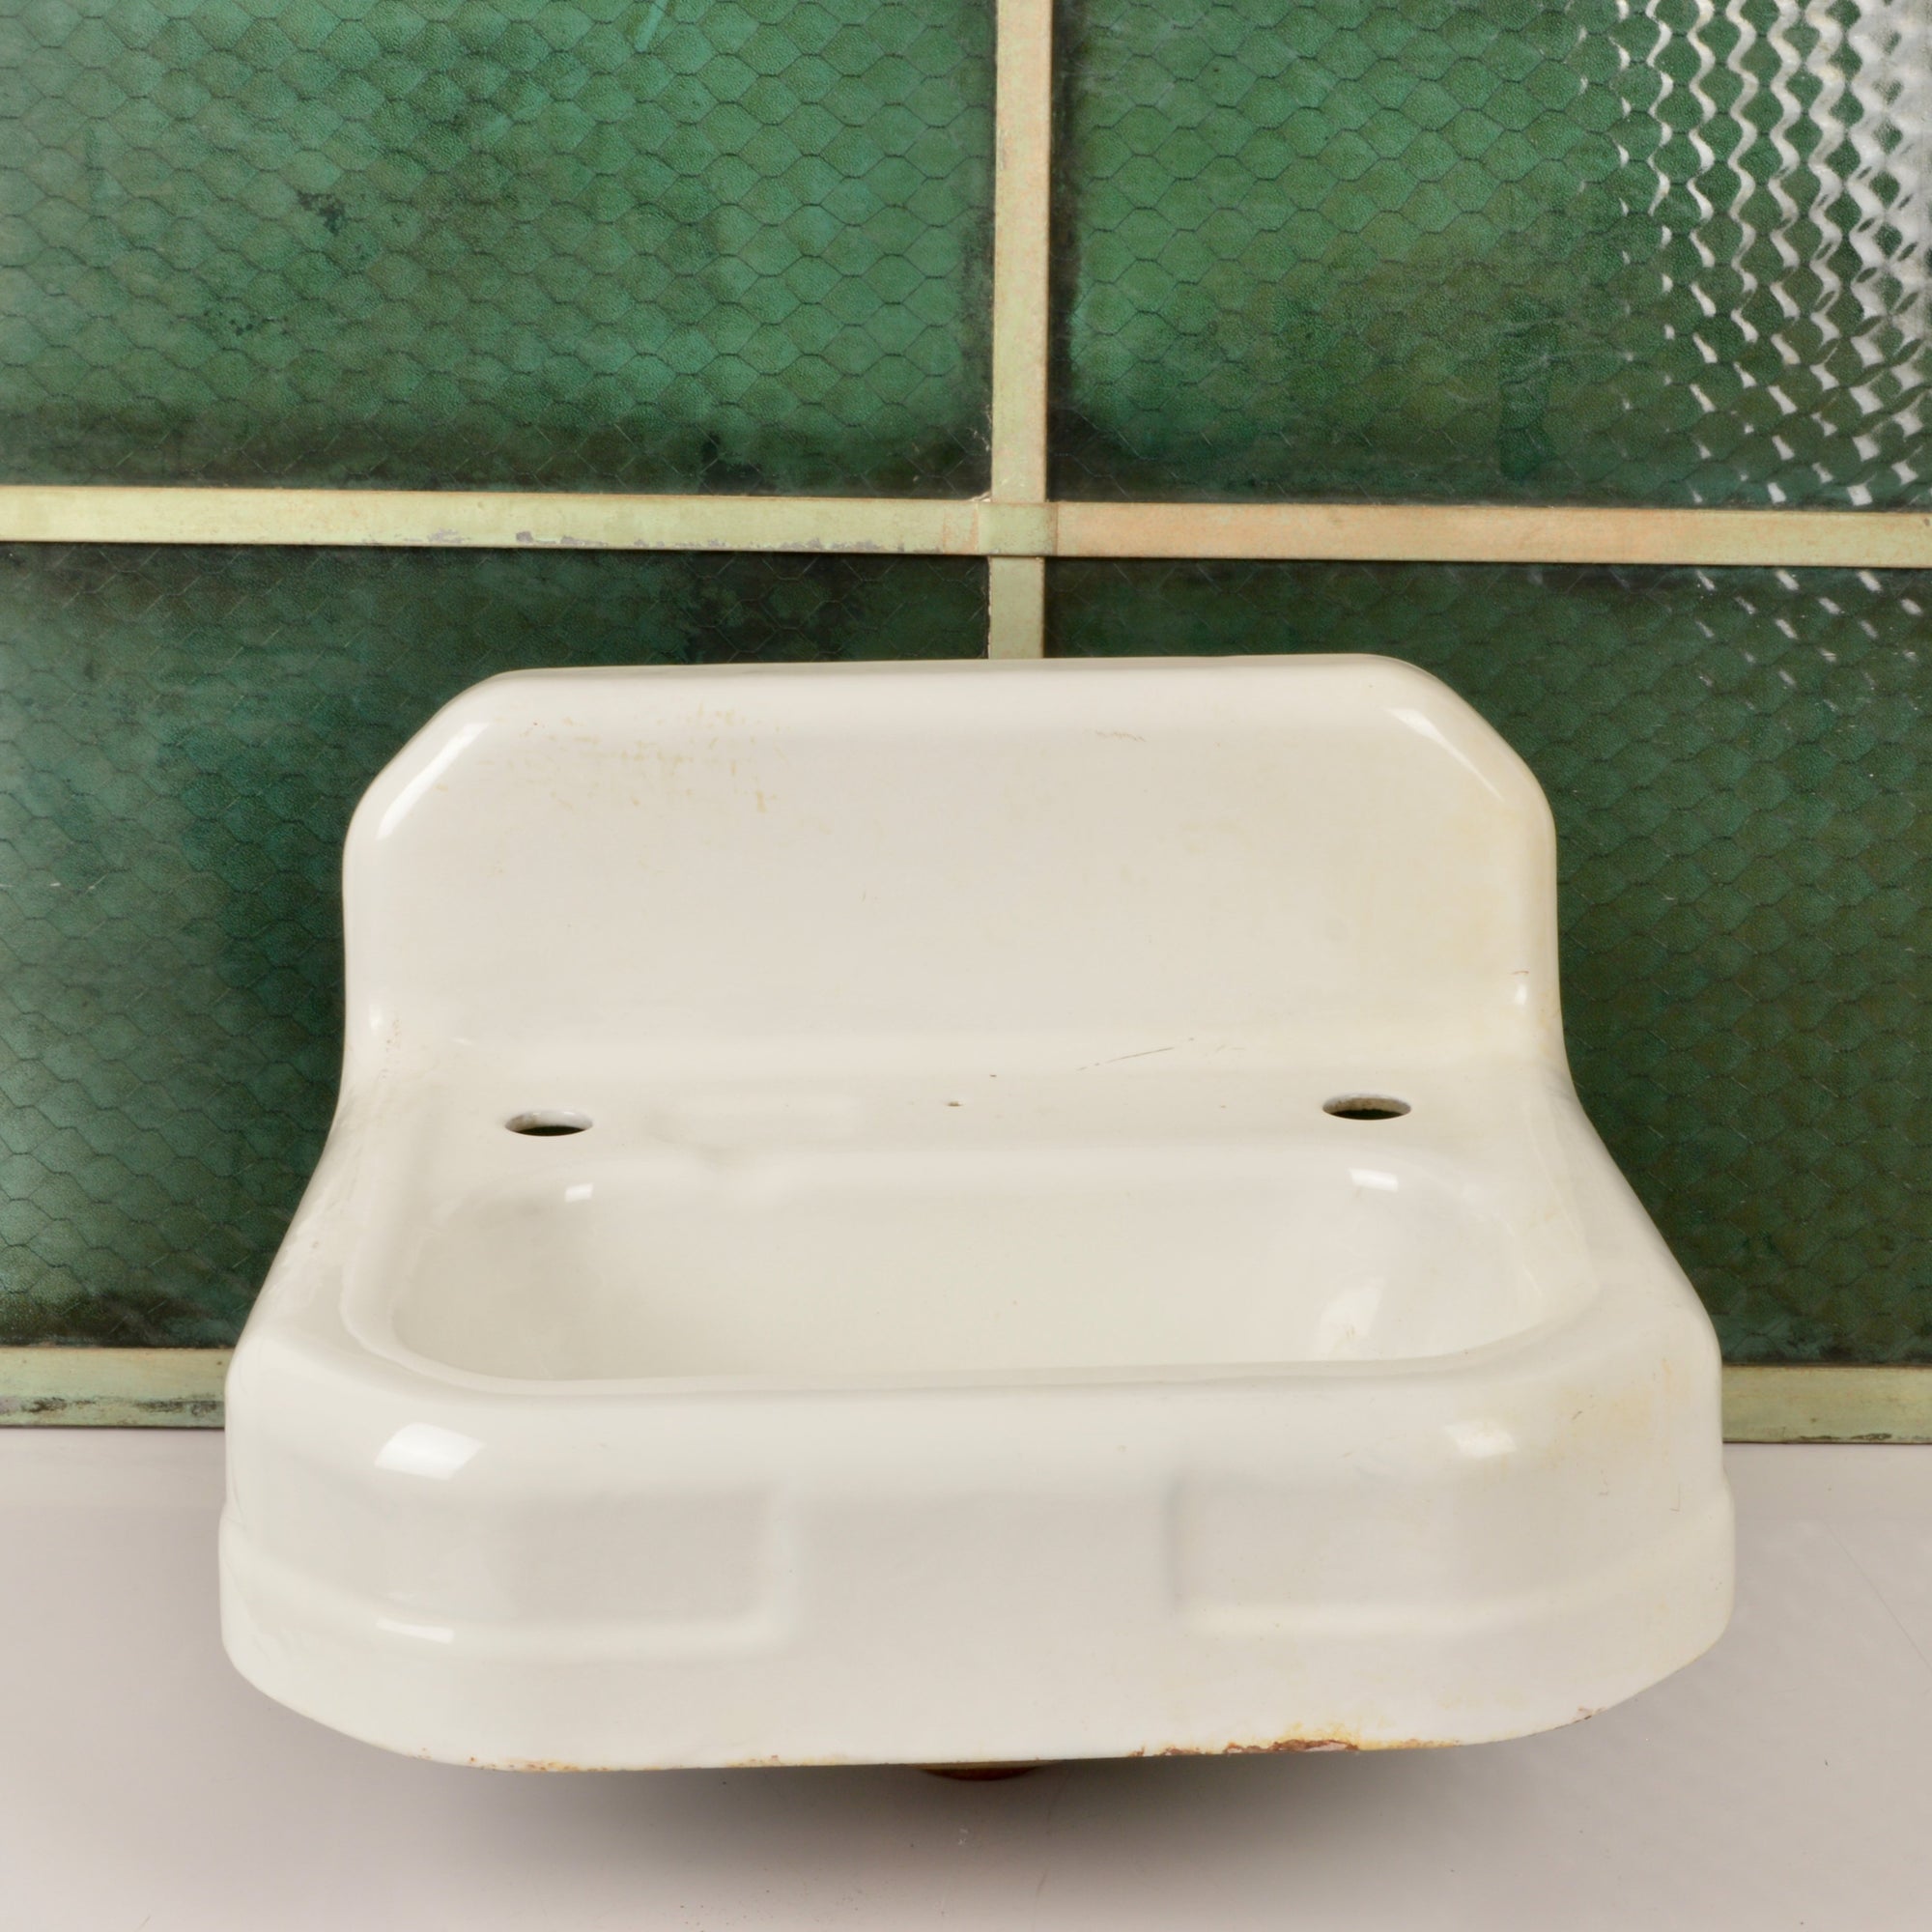 Cast Iron And Porcelain Wall Sink Salvage-Garden